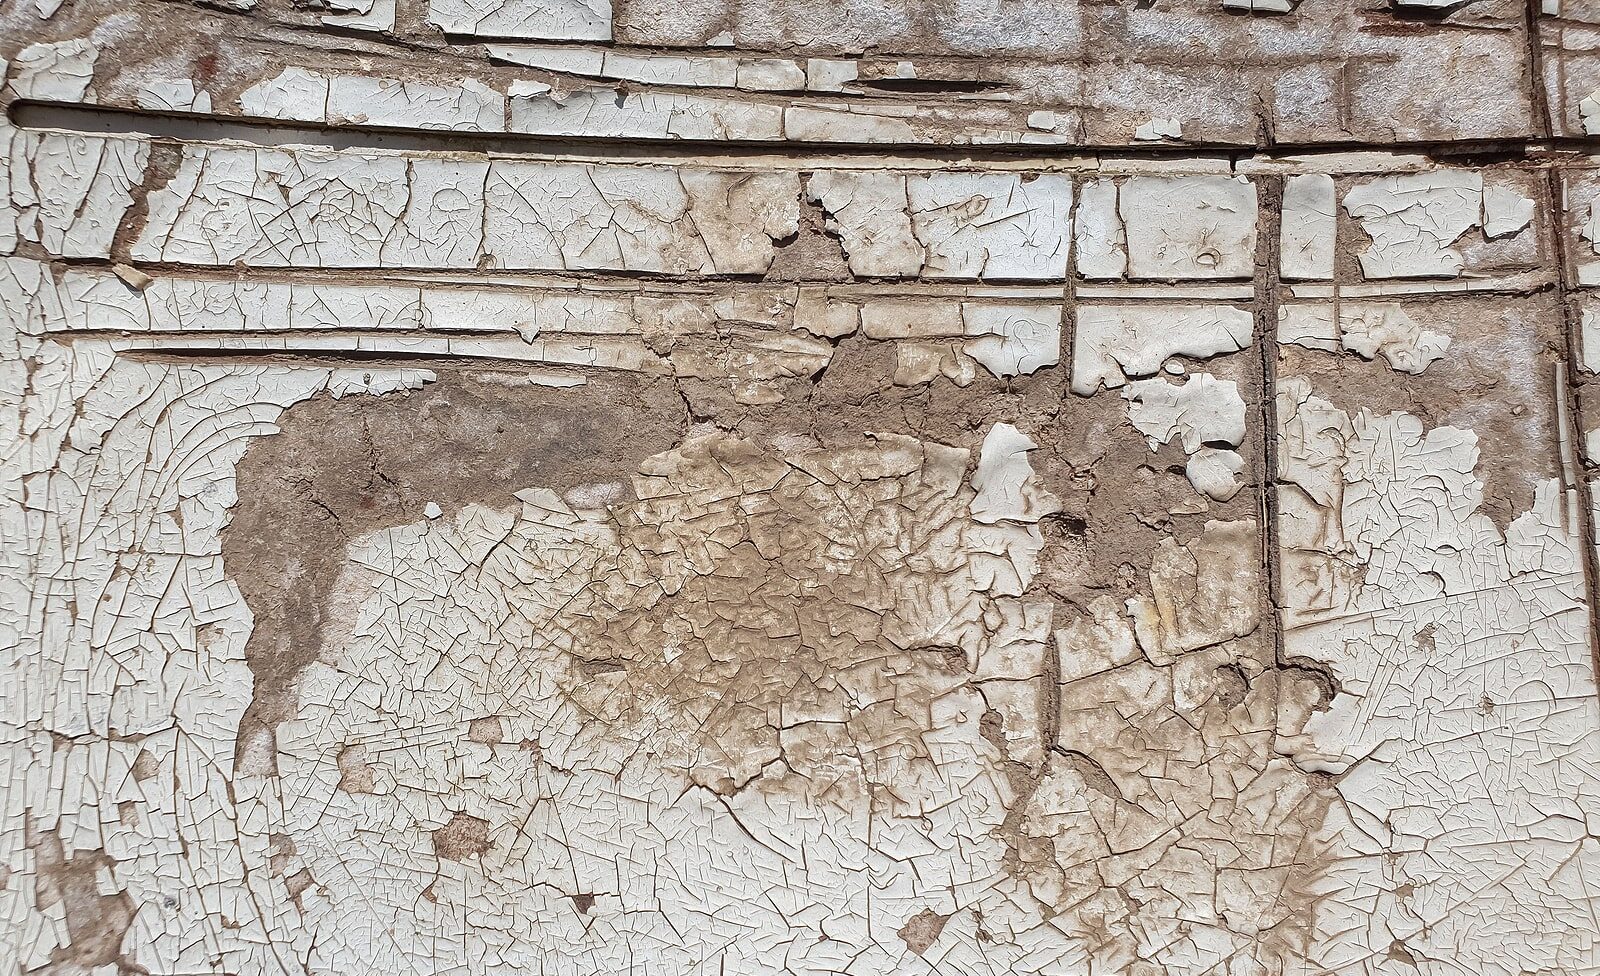 Image of dry rot damage to wood